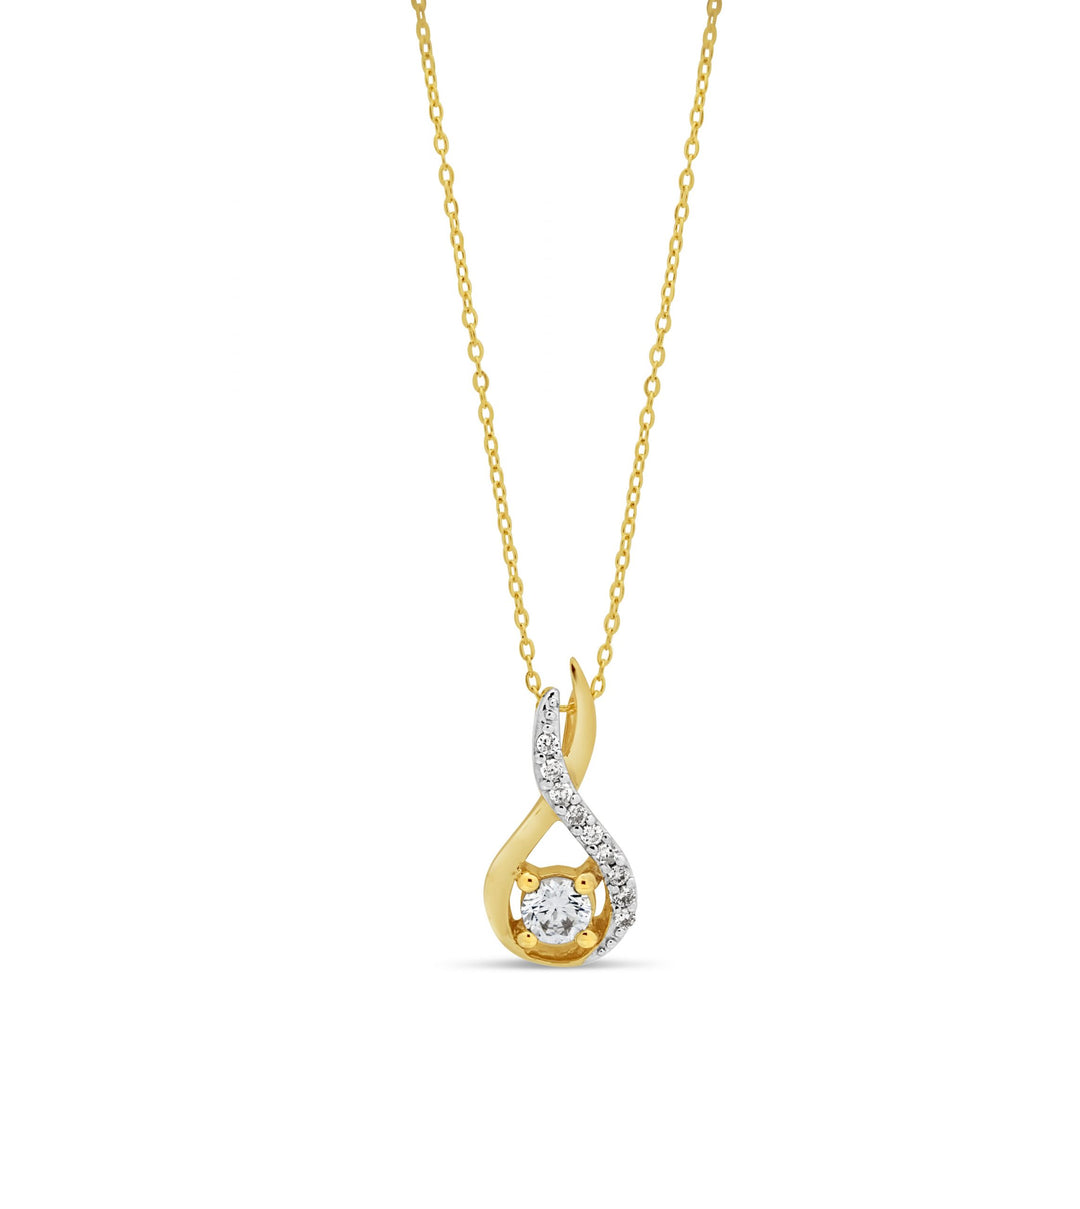 Gold Figure 8 pendant necklace with diamonds, featuring an open infinity design on a delicate yellow gold chain, symbolizing eternal love.